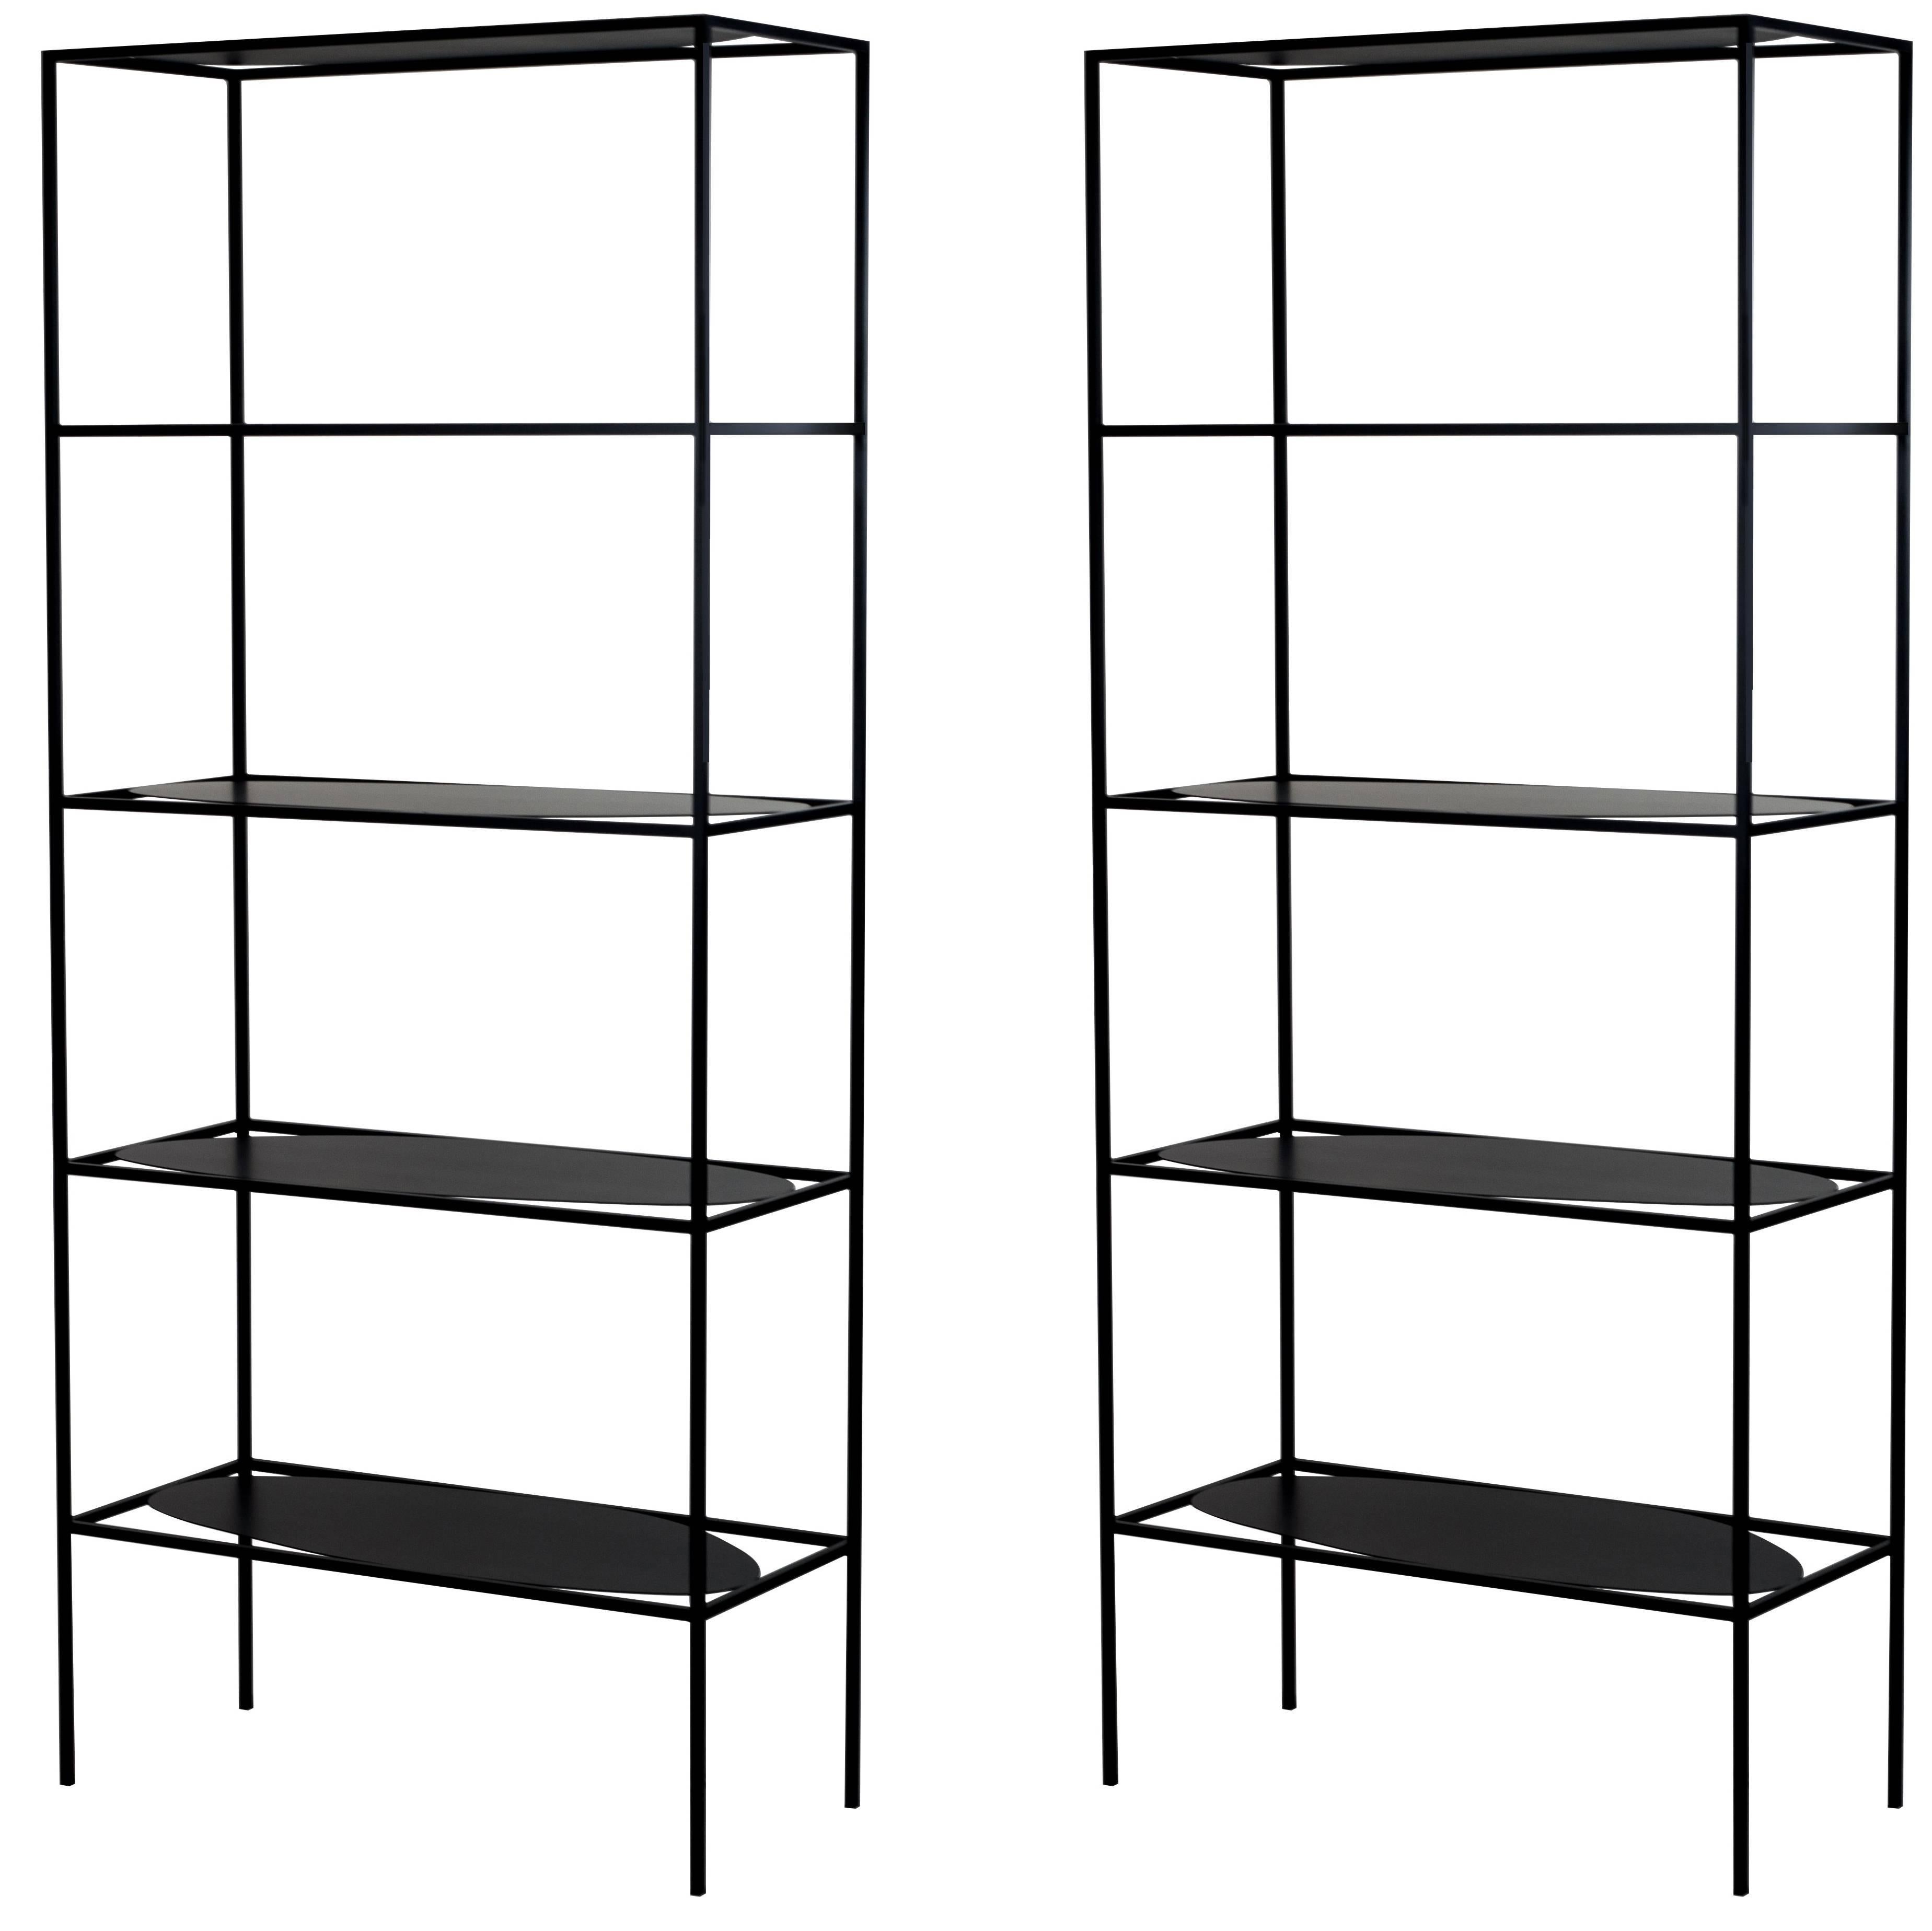 This set includes two modern Etagere bookcases Storage Shelves which are contemporary and sculptural.

The functional modern yet minimal sculptural Ahn Etagere is a study in positive and negative space. With its five different asymmetrical and